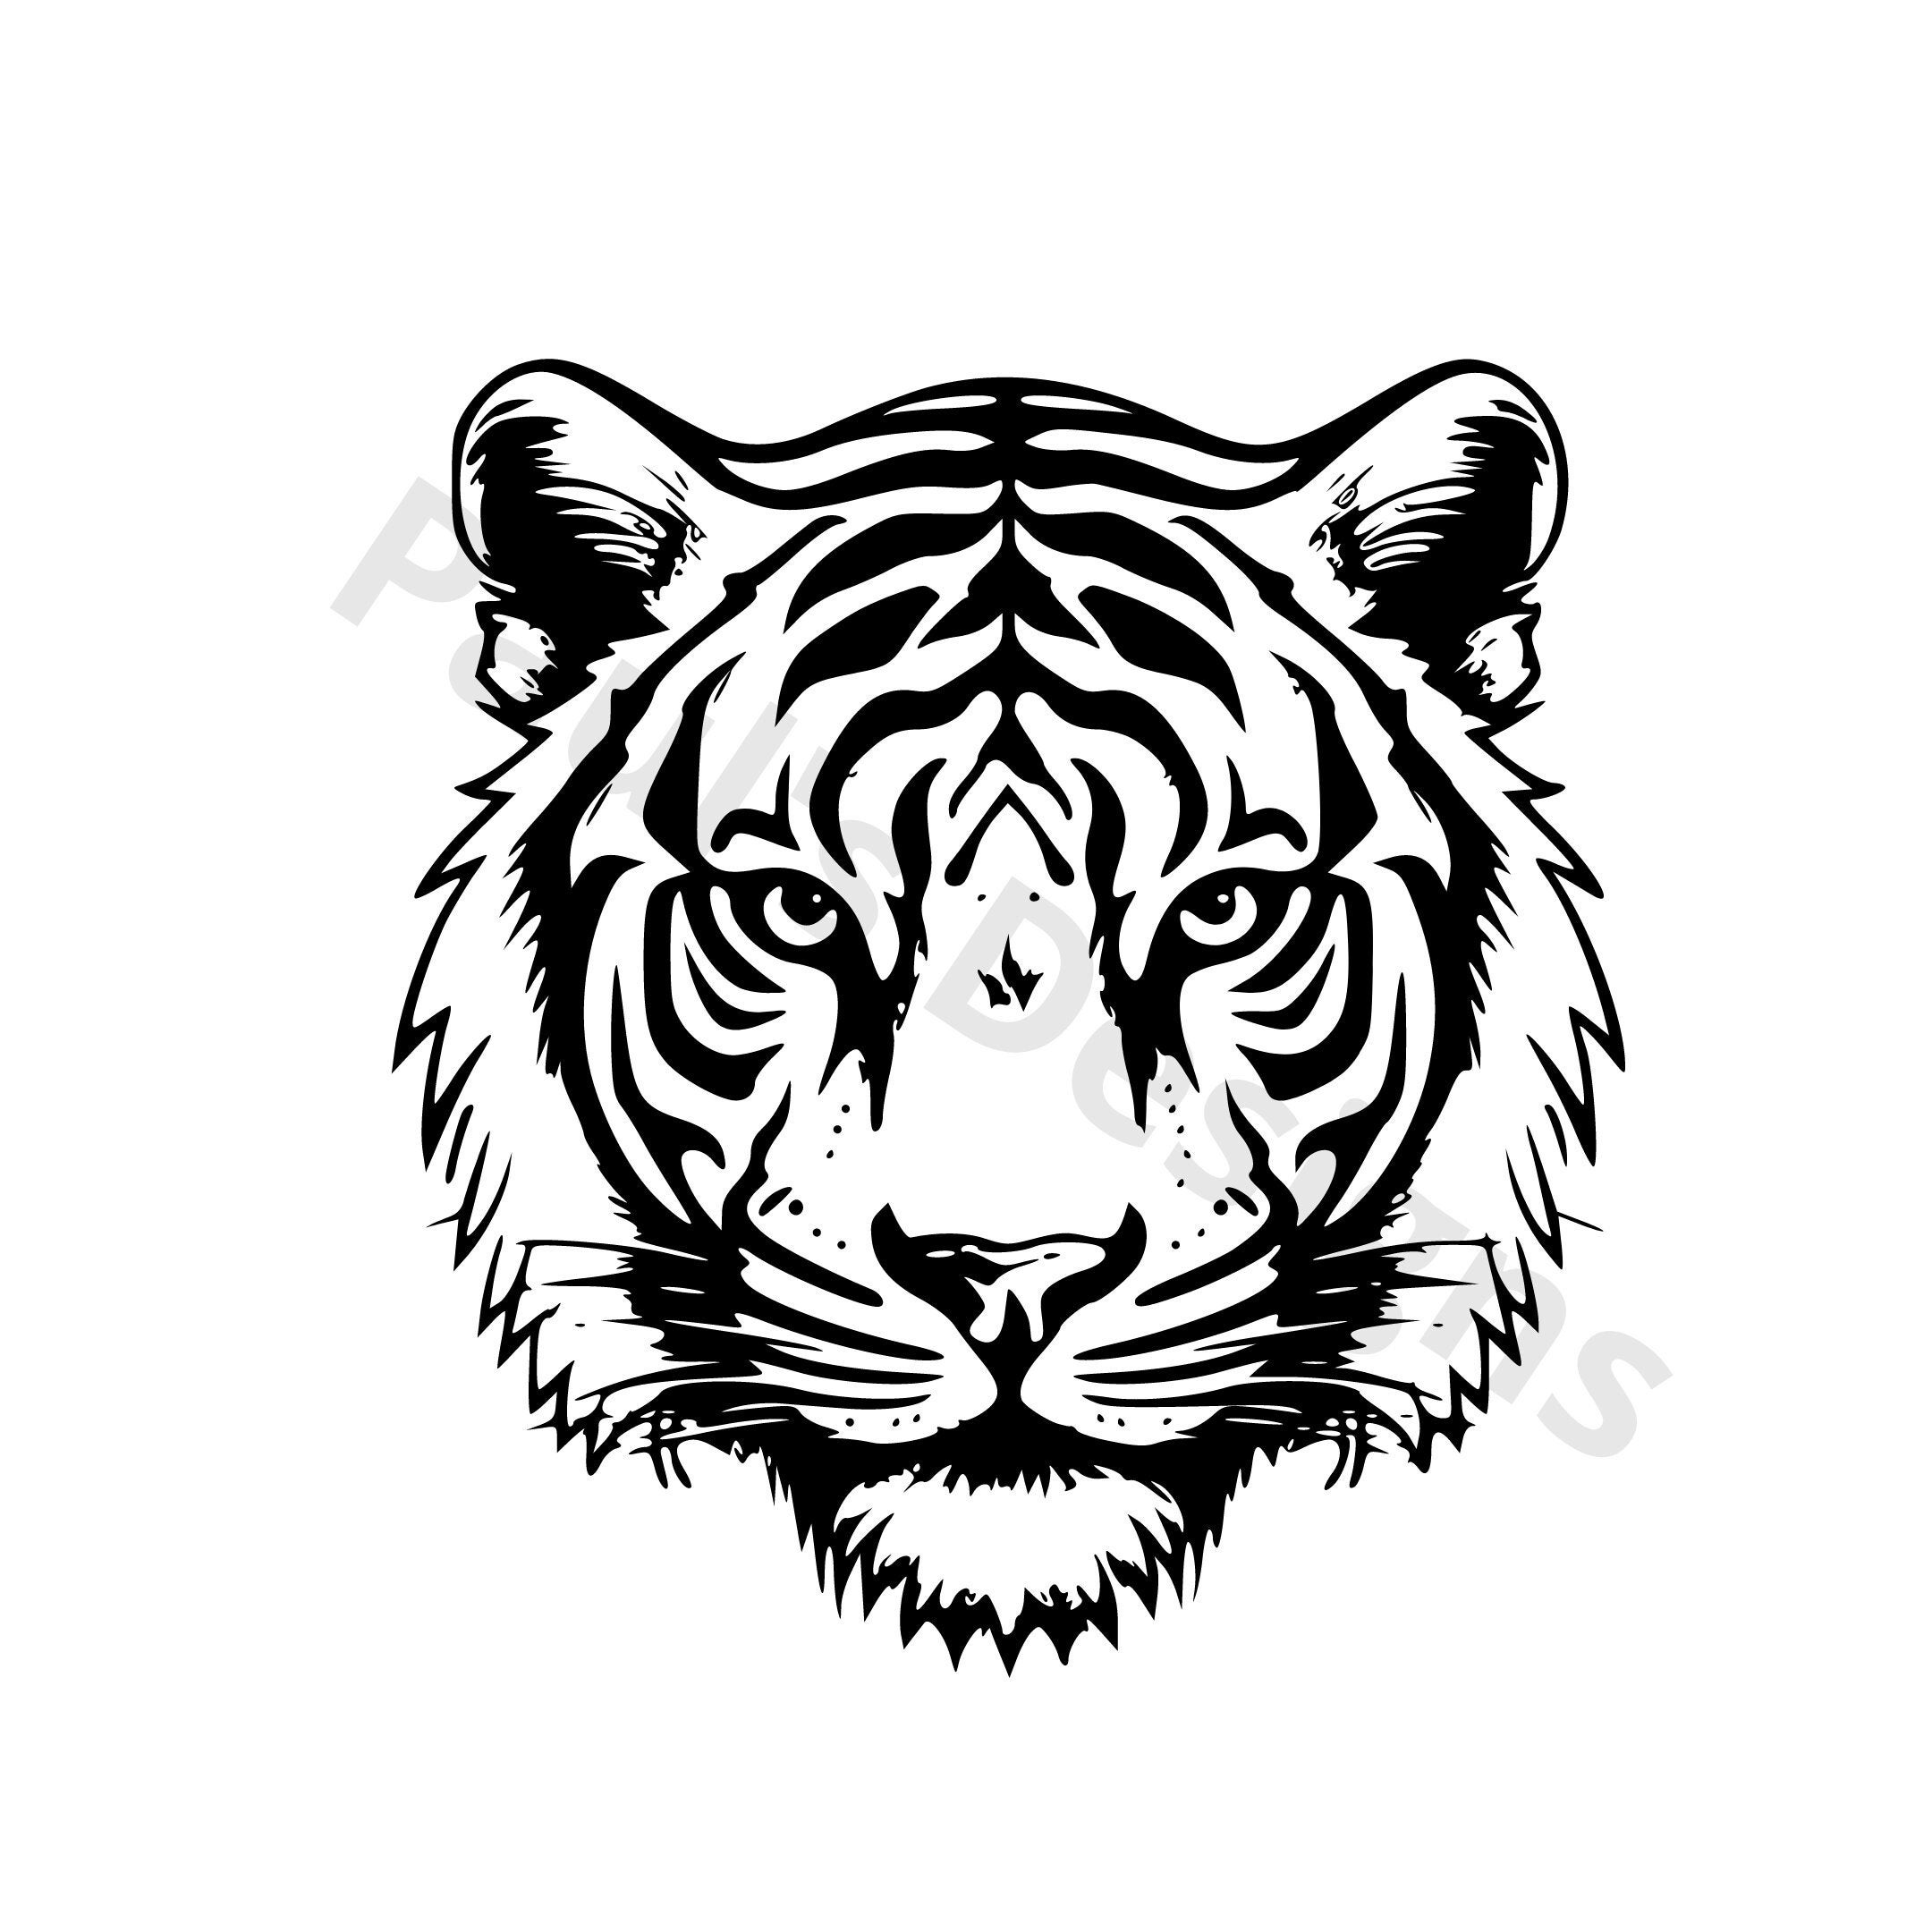 Tiger Decor Black and White Oil Painting Animal Art Print by Eric Sweet 